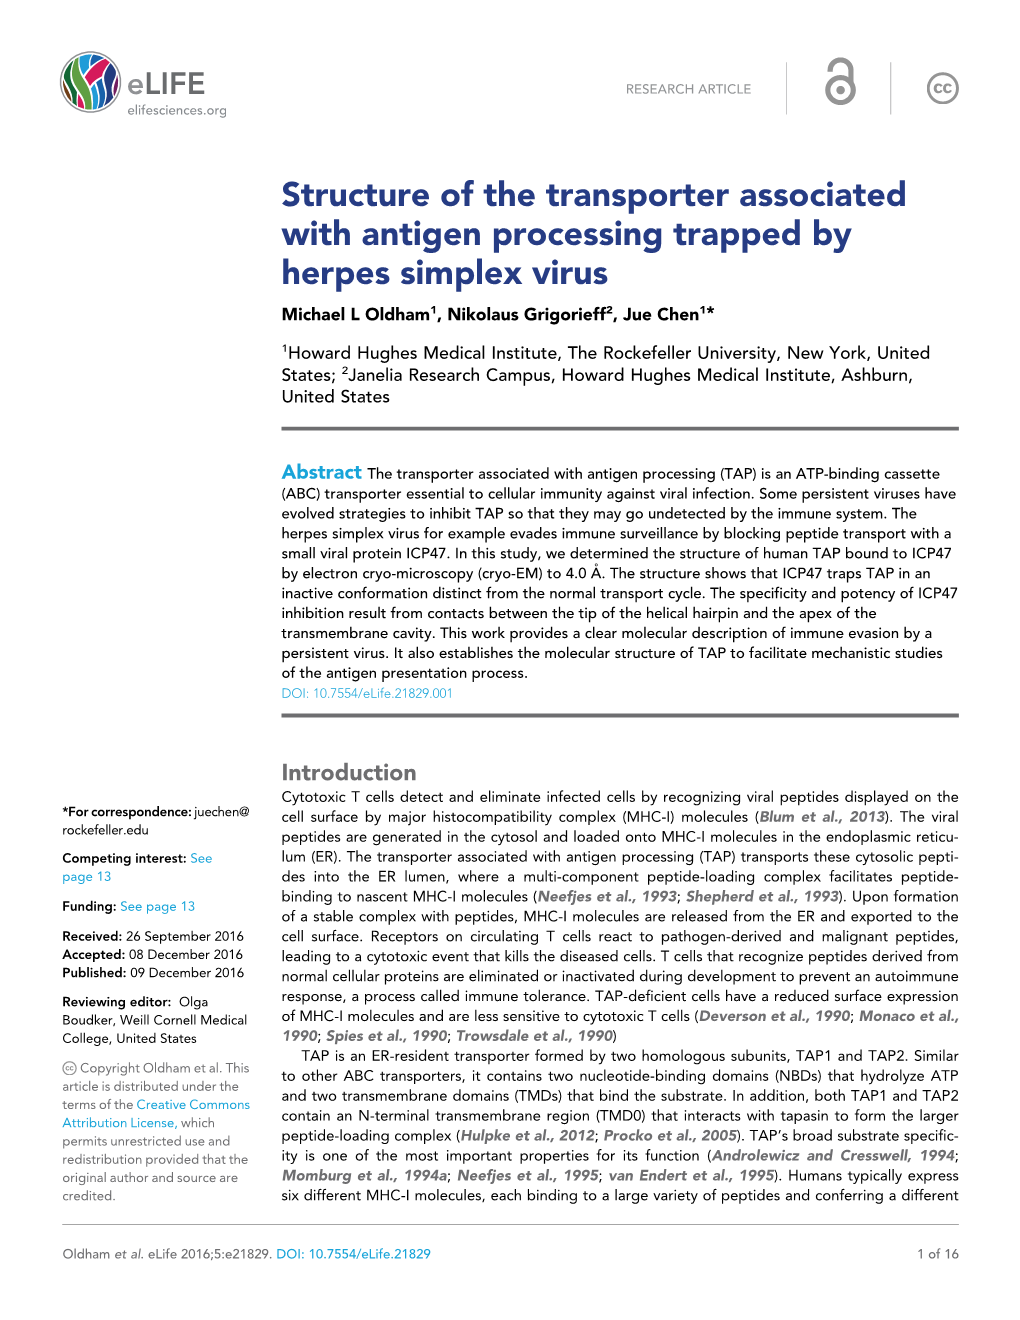 Structure of the Transporter Associated with Antigen Processing Trapped by Herpes Simplex Virus Michael L Oldham1, Nikolaus Grigorieff2, Jue Chen1*